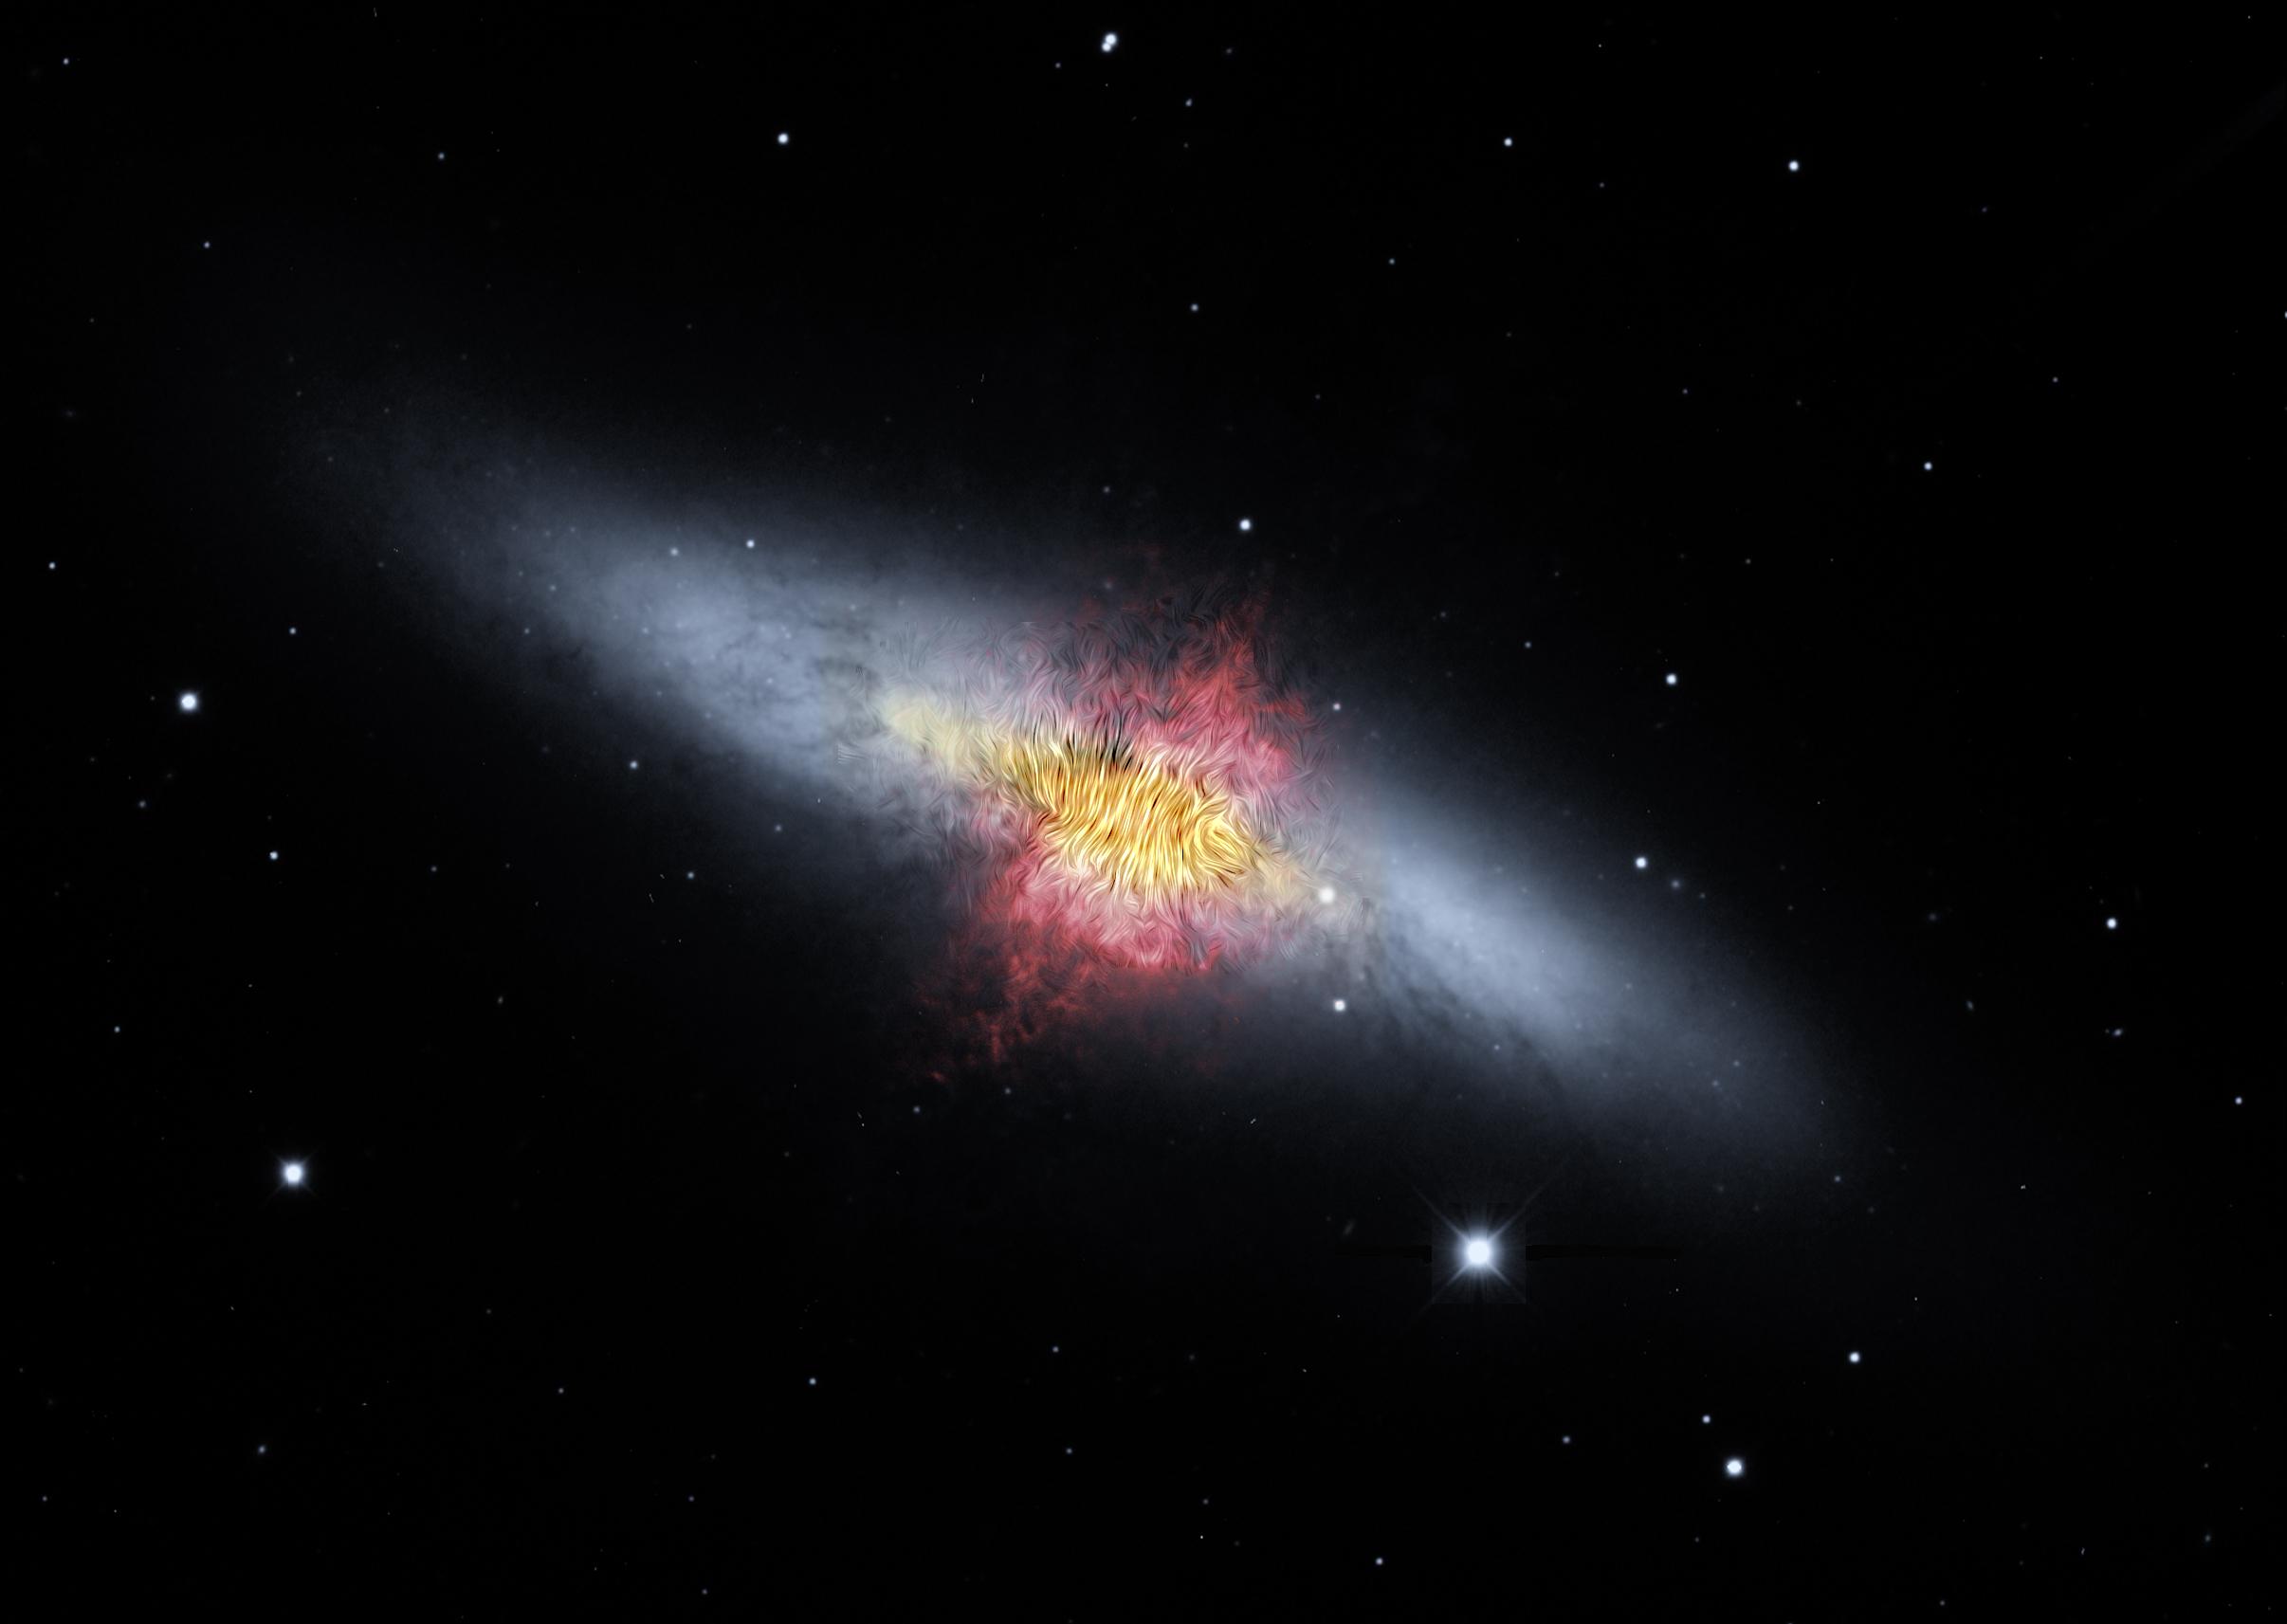 The magnetic field lines of the the Cigar Galaxy (also called M82) appear in this composite image produced by NASAs Spitzer Space Telescope. The lines follow the bipolar outflows (red) generated by exceptionally high rates of star formation.